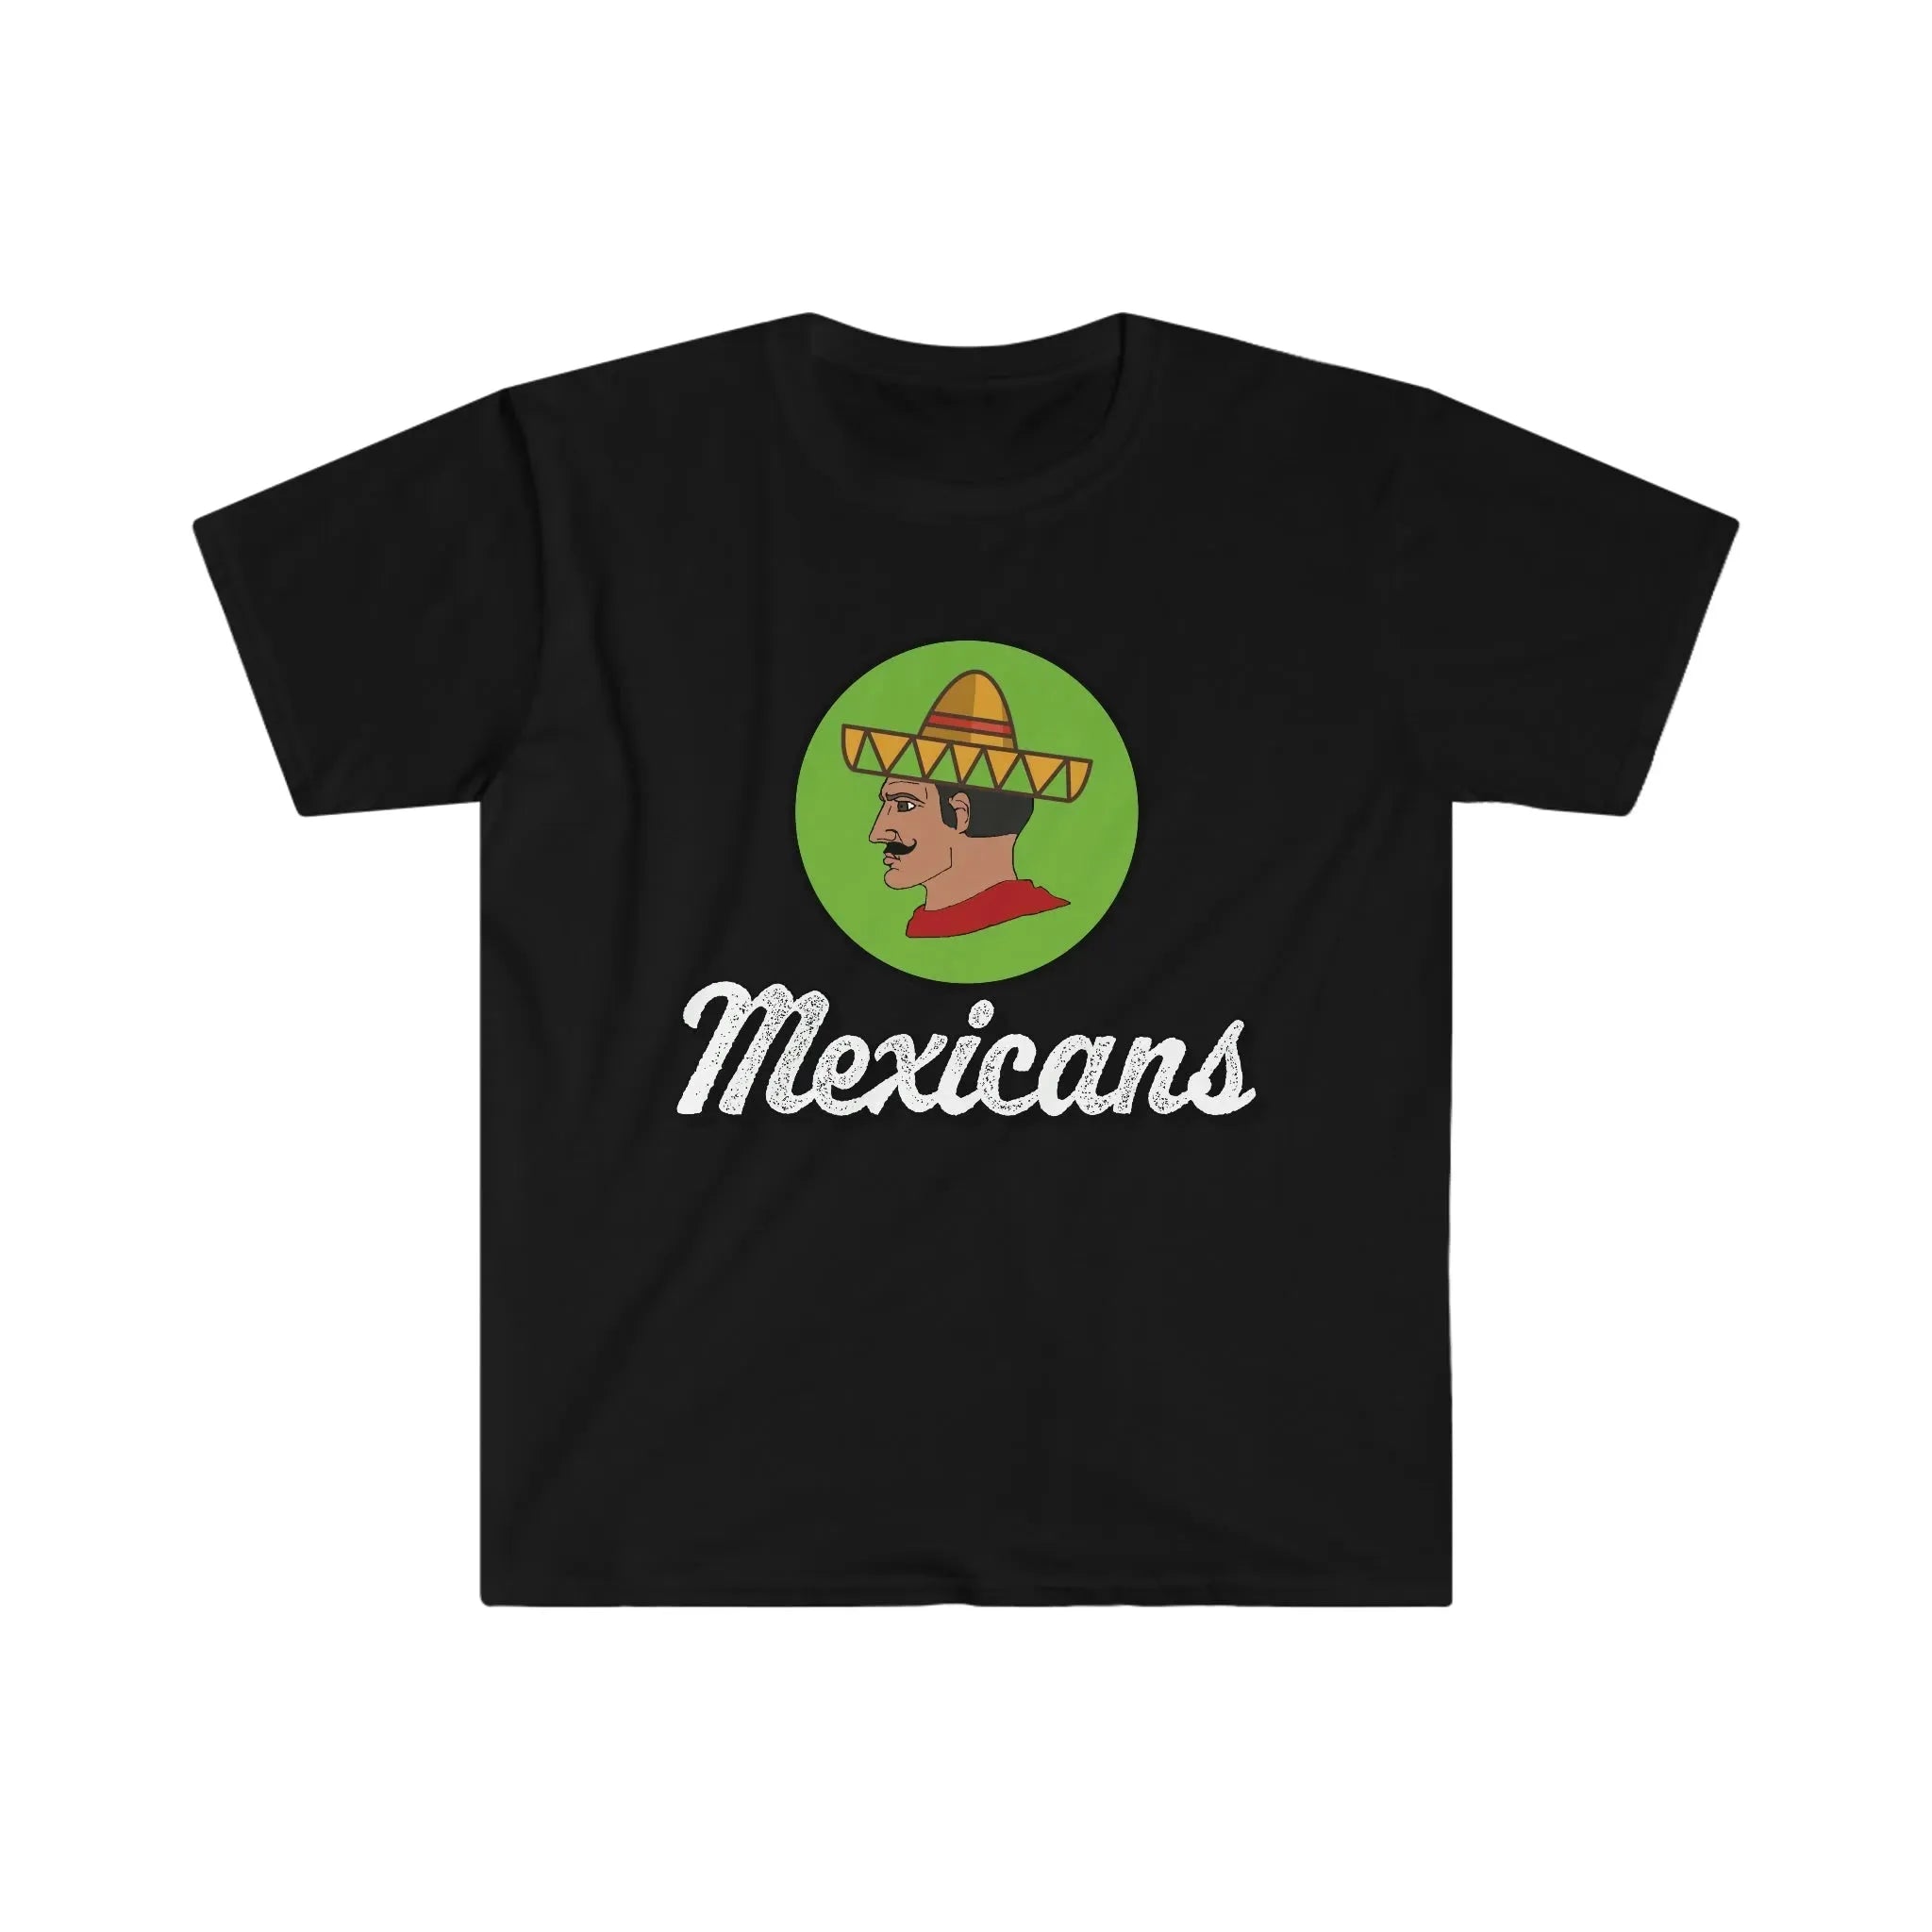 Mexican Chad: The Ultimate Team Tee